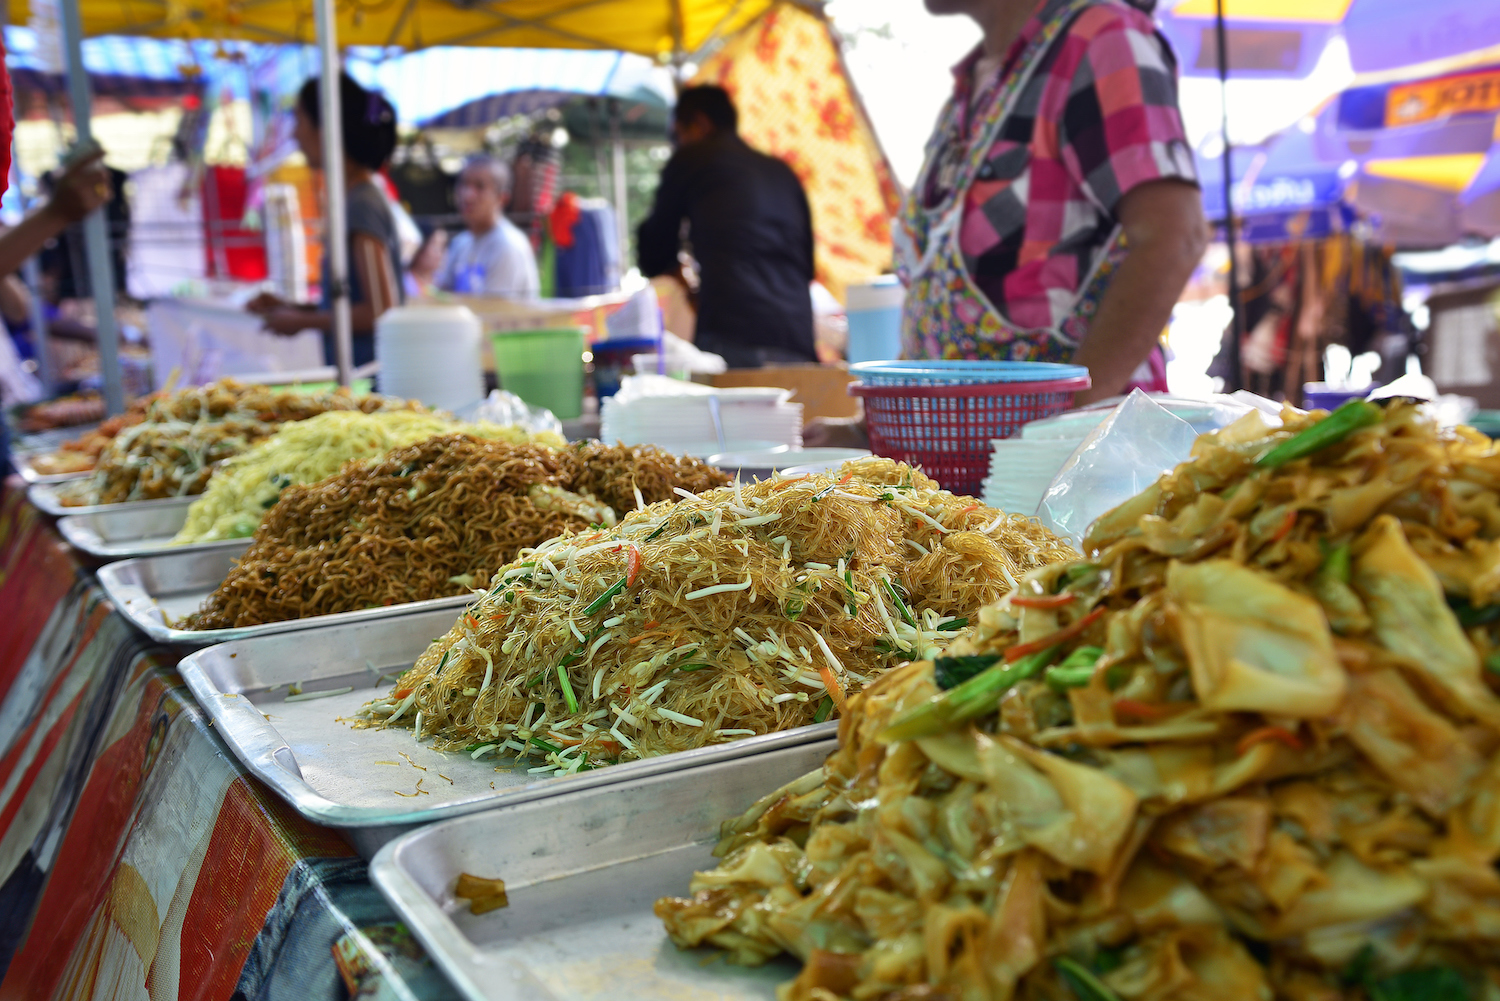 Piles of noodles at a street market in Thailand